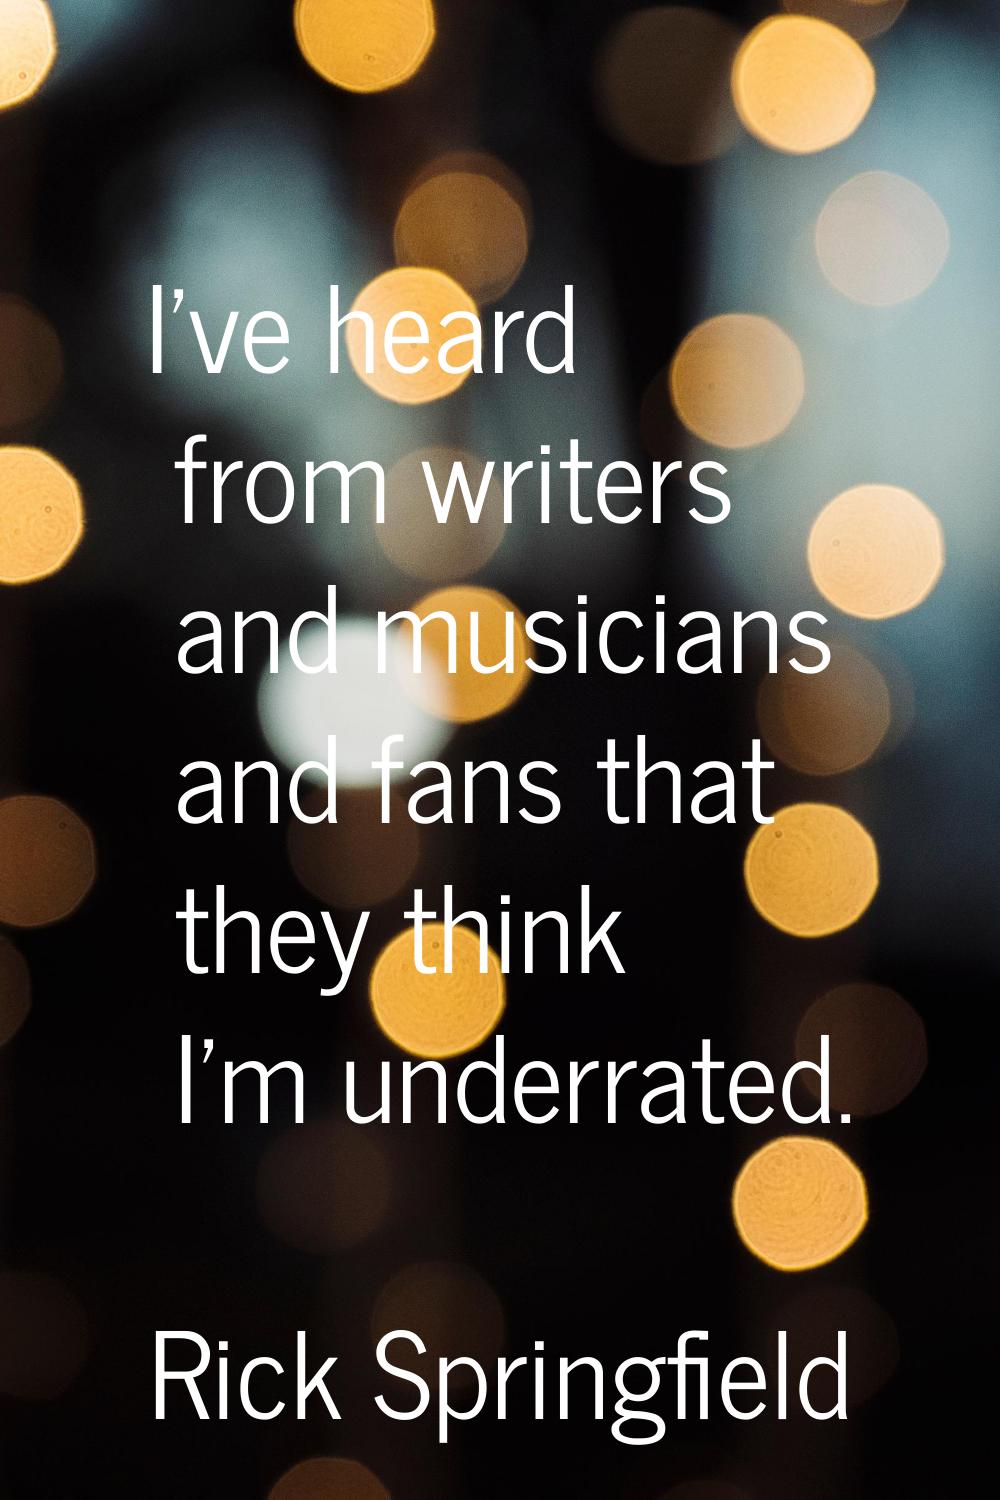 I've heard from writers and musicians and fans that they think I'm underrated.